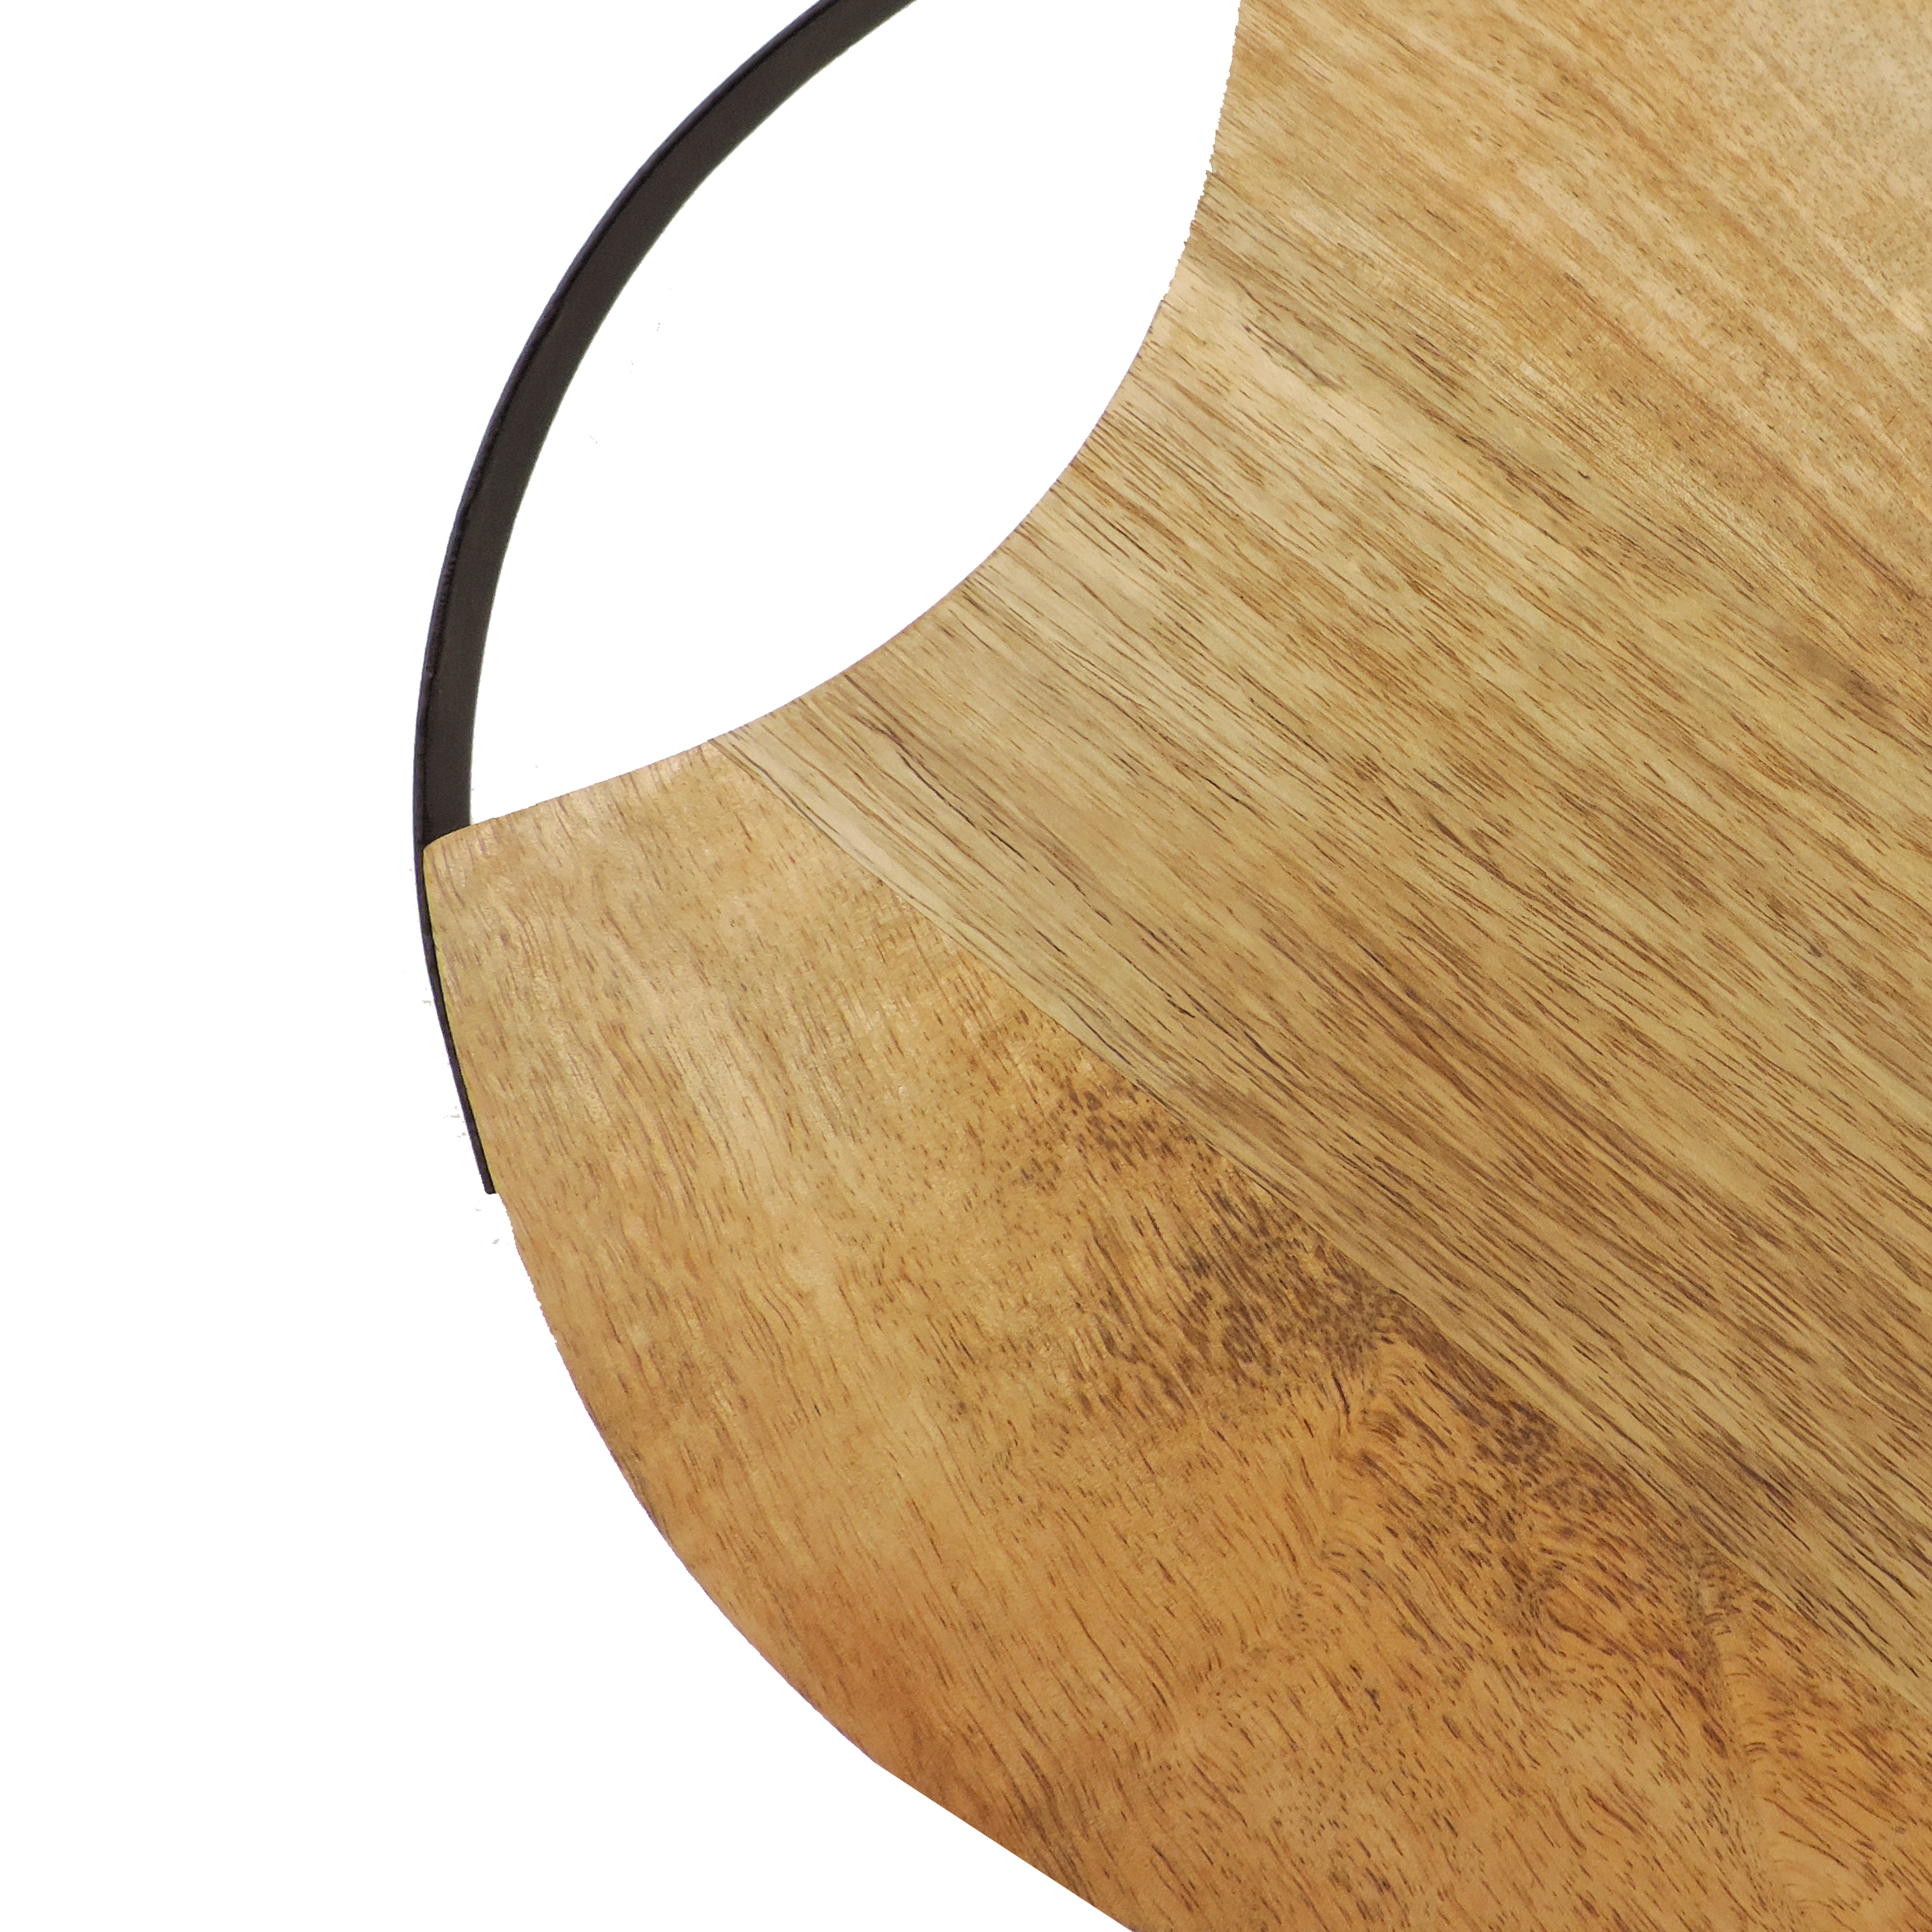 Wooden Round Chopping Board with Metal Handle - 29 cm Dia